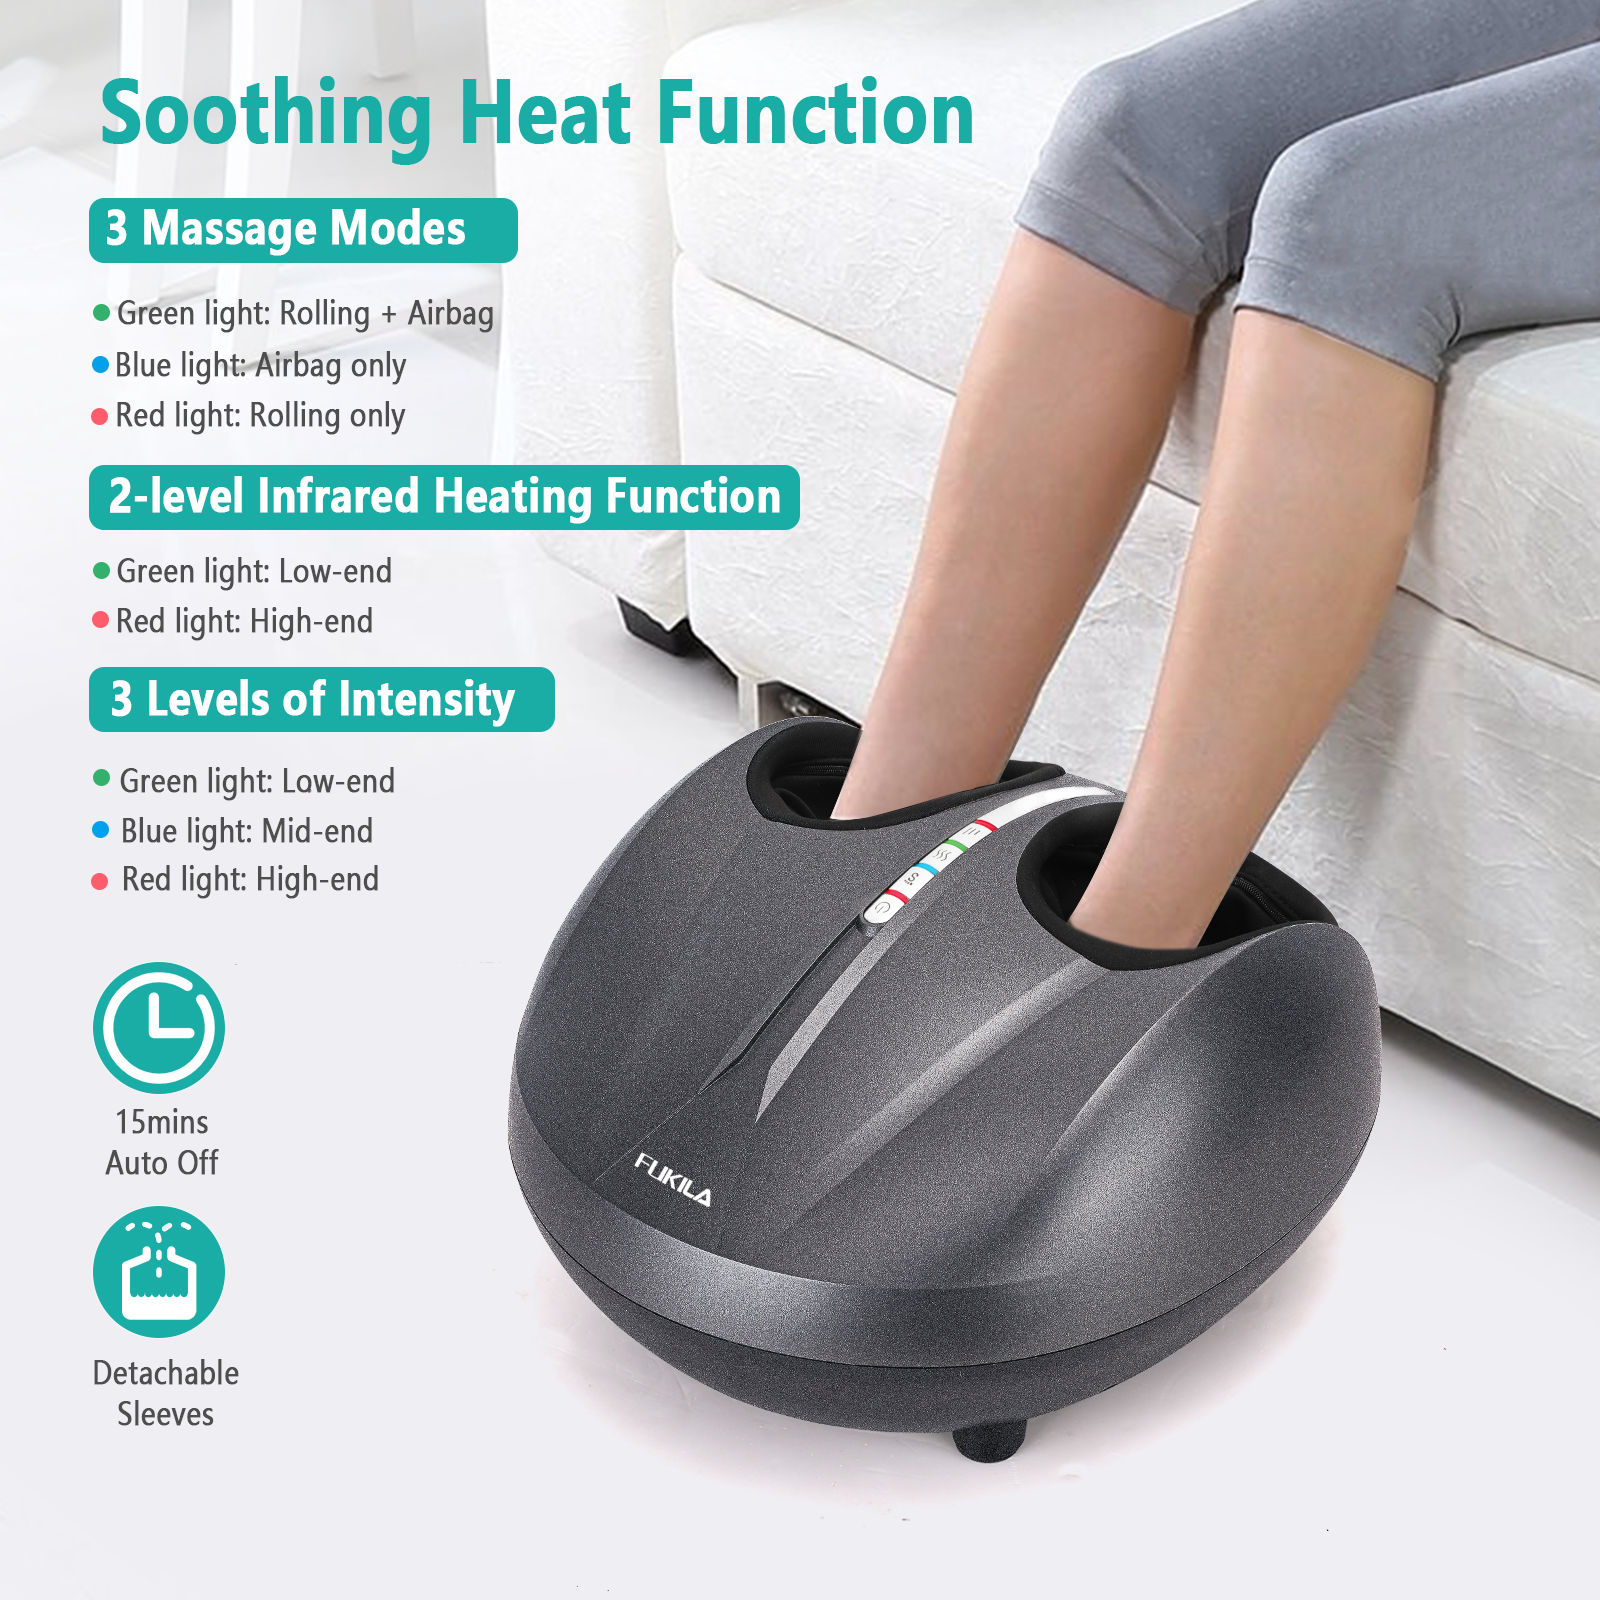 Nekteck Foot Massager with Heat, Shiatsu Heated Electric Kneading Foot  Massager Machine for Plantar Fasciitis, Built-in Infrared Heat Function and  Power Cord(Blue)